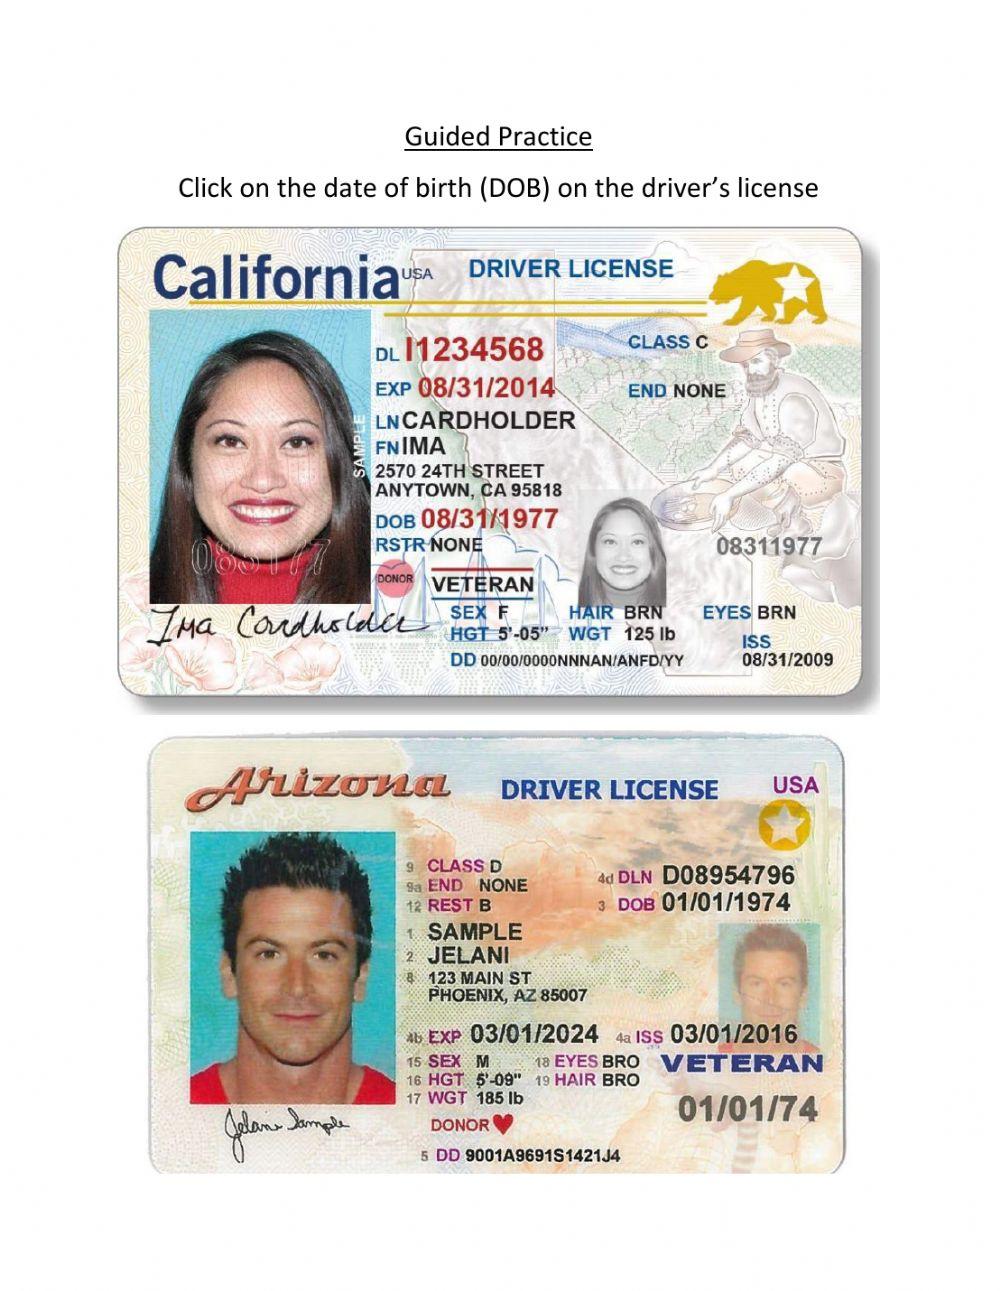 Guided Practice: DOB on Driver's License